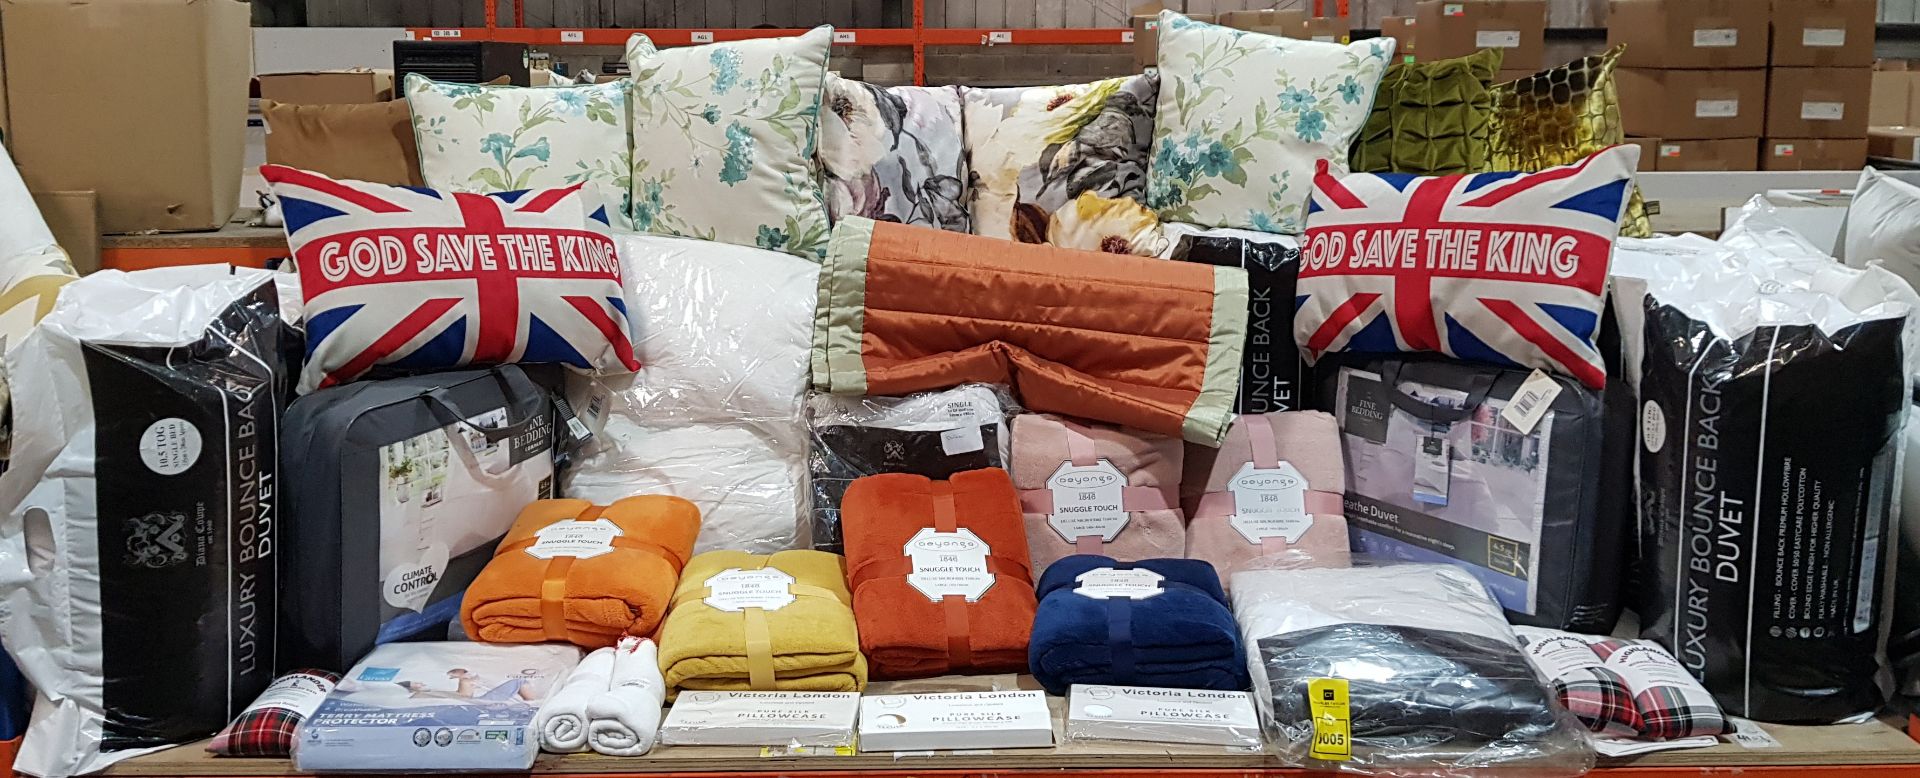 30+ BRAND NEW MIXED BEDDING LOT THIS INCLUDES THE FINE BEDDING COMPANY BREATHE PILLOWS SIZE 74 X